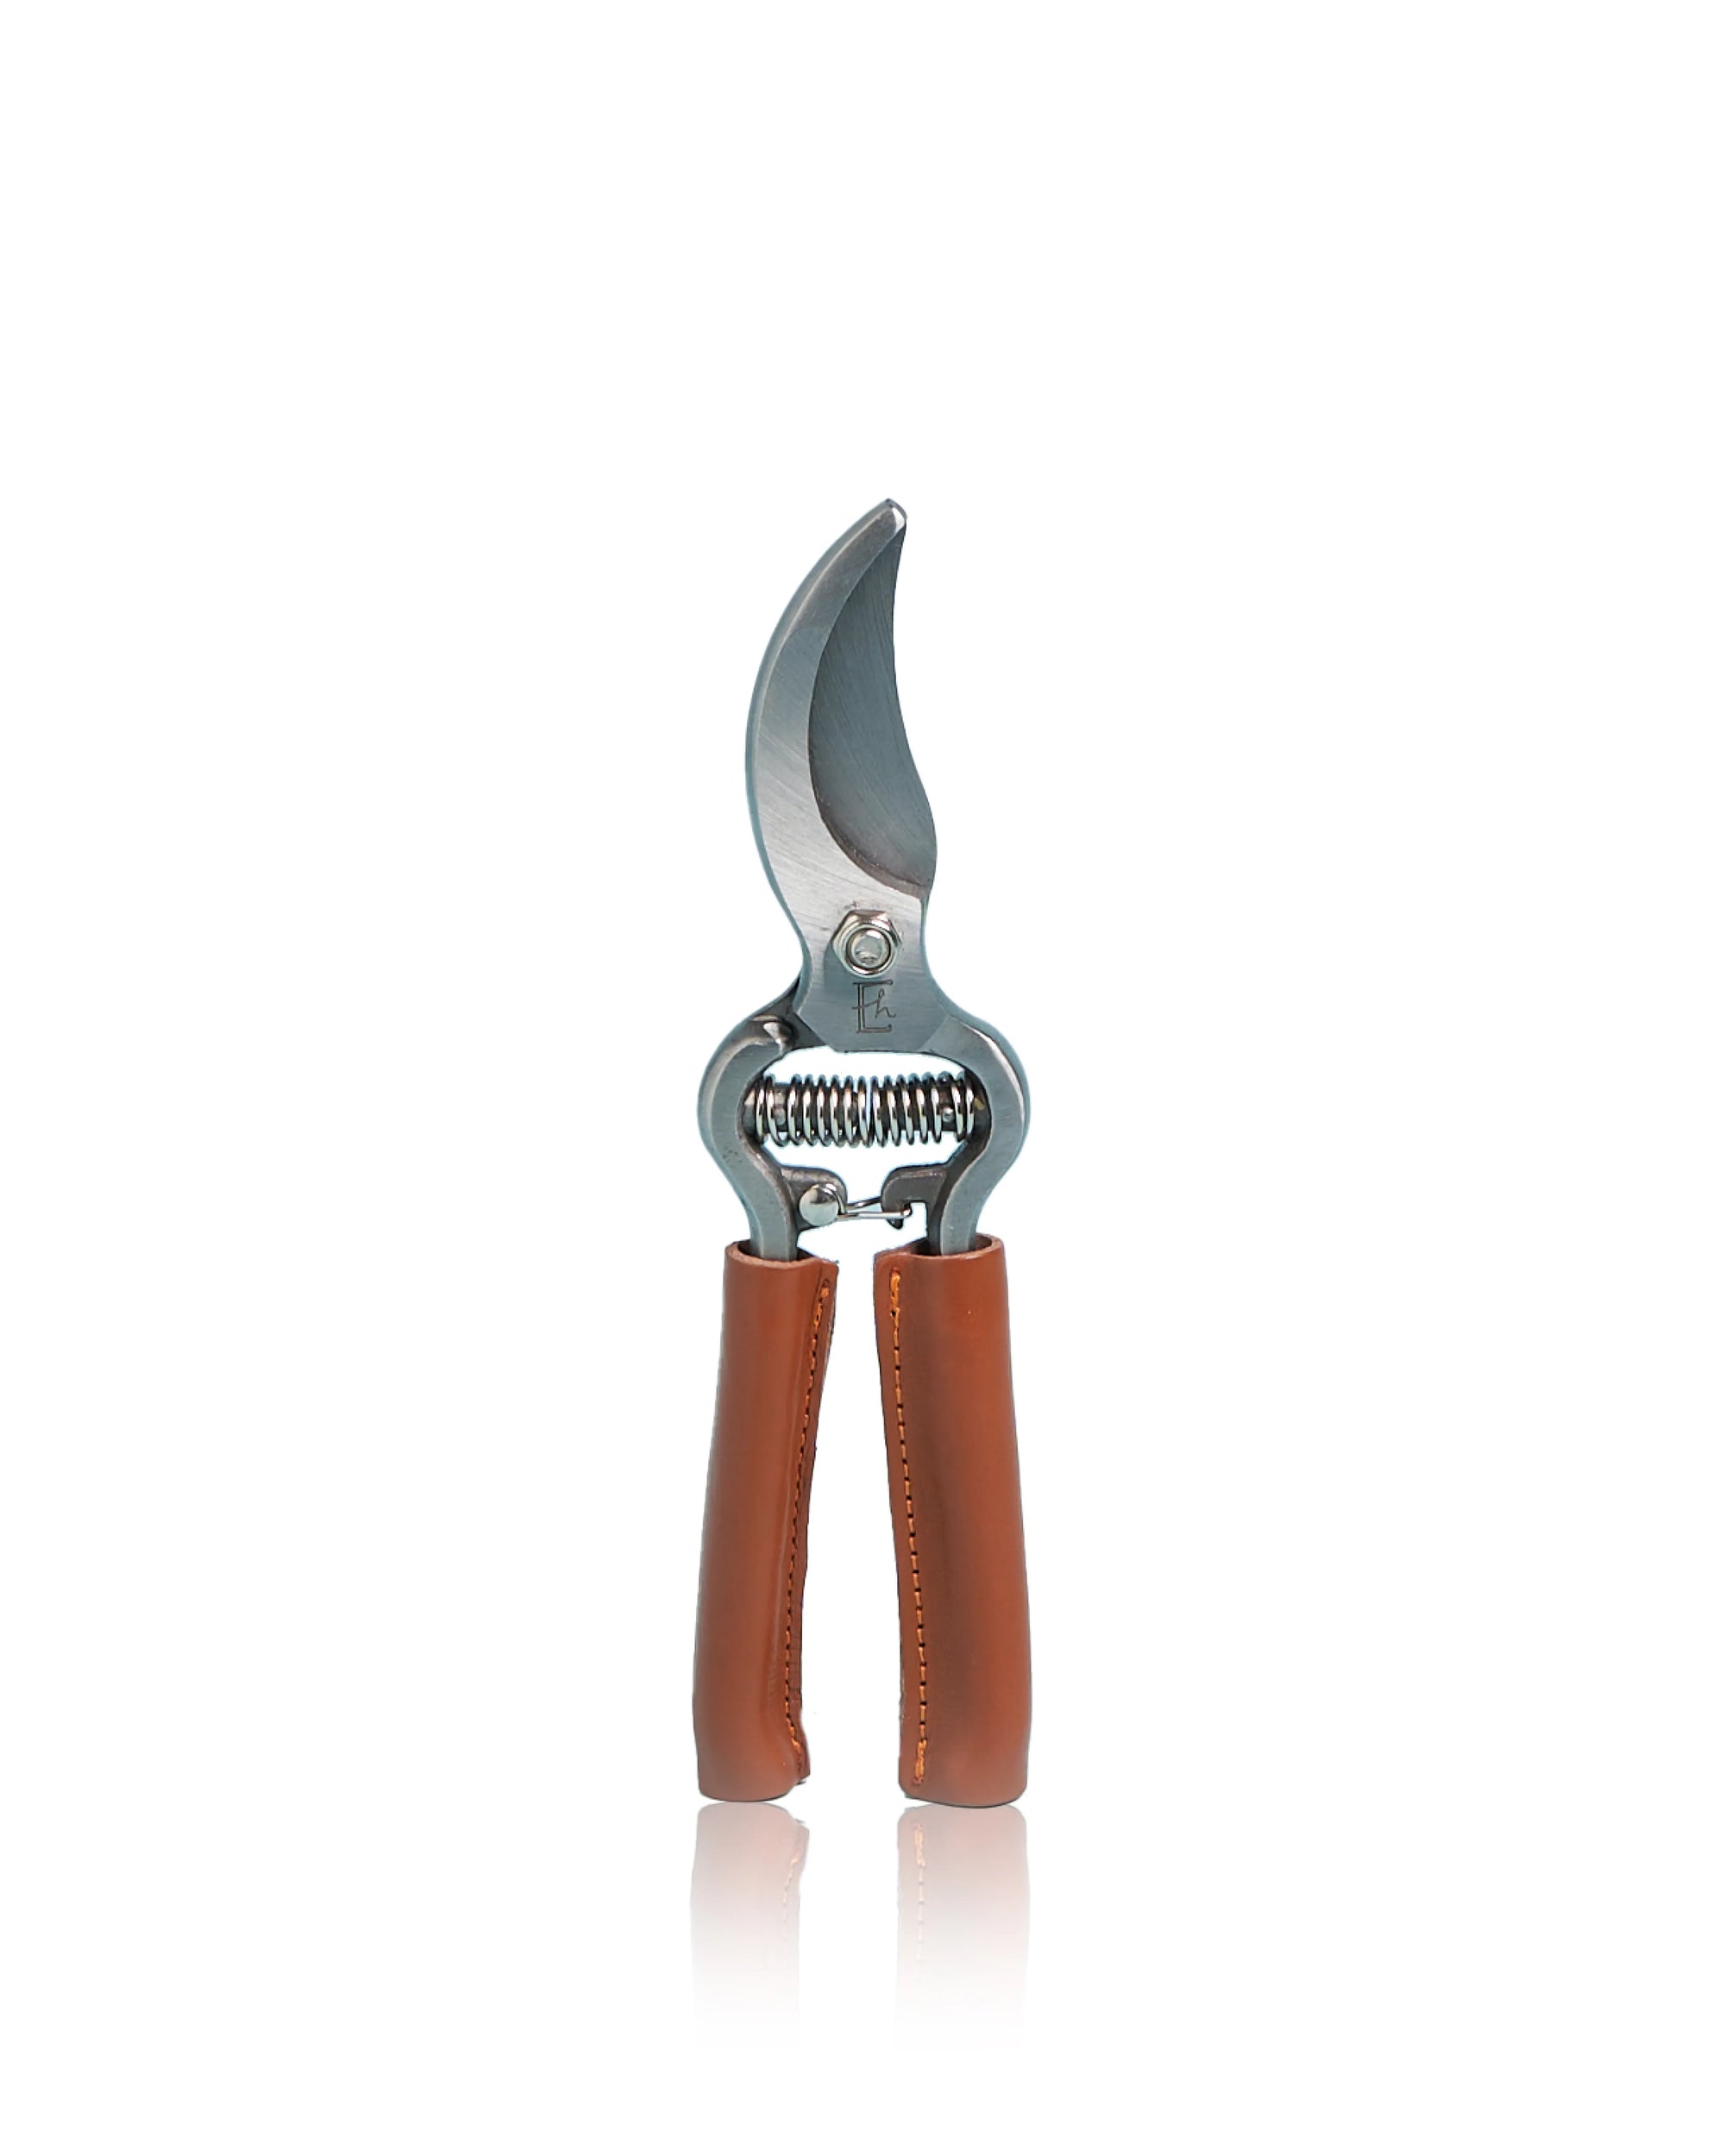 Leather handled Secateurs